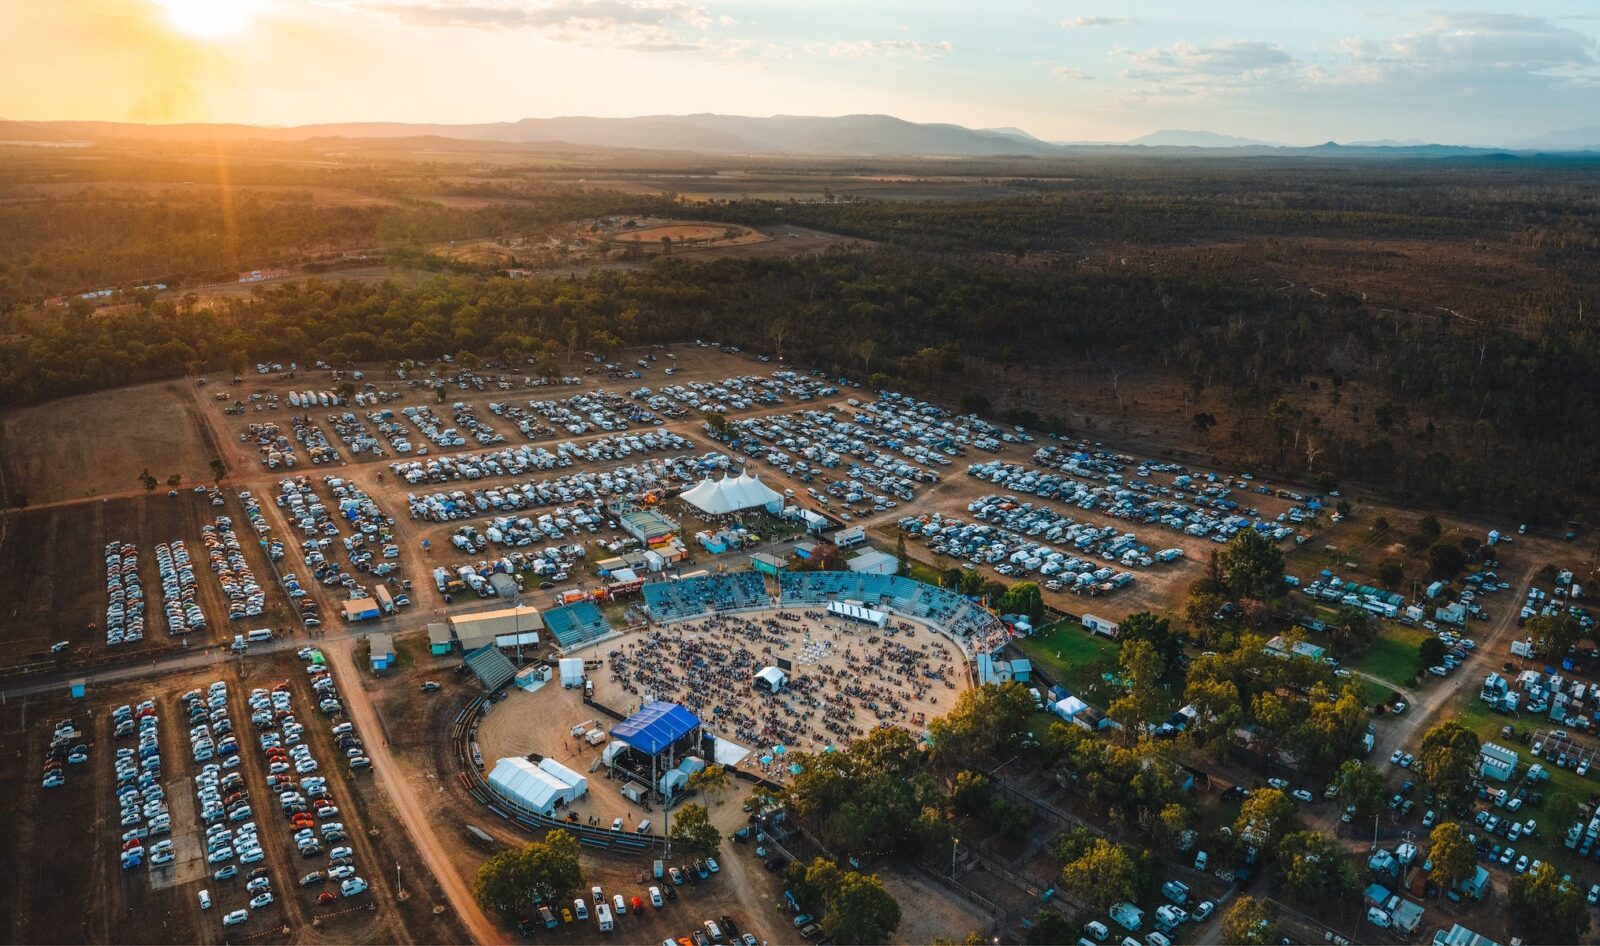 Aerial view of Savannah in the Round (Mareeba Rodeo Arena and campgrounds)